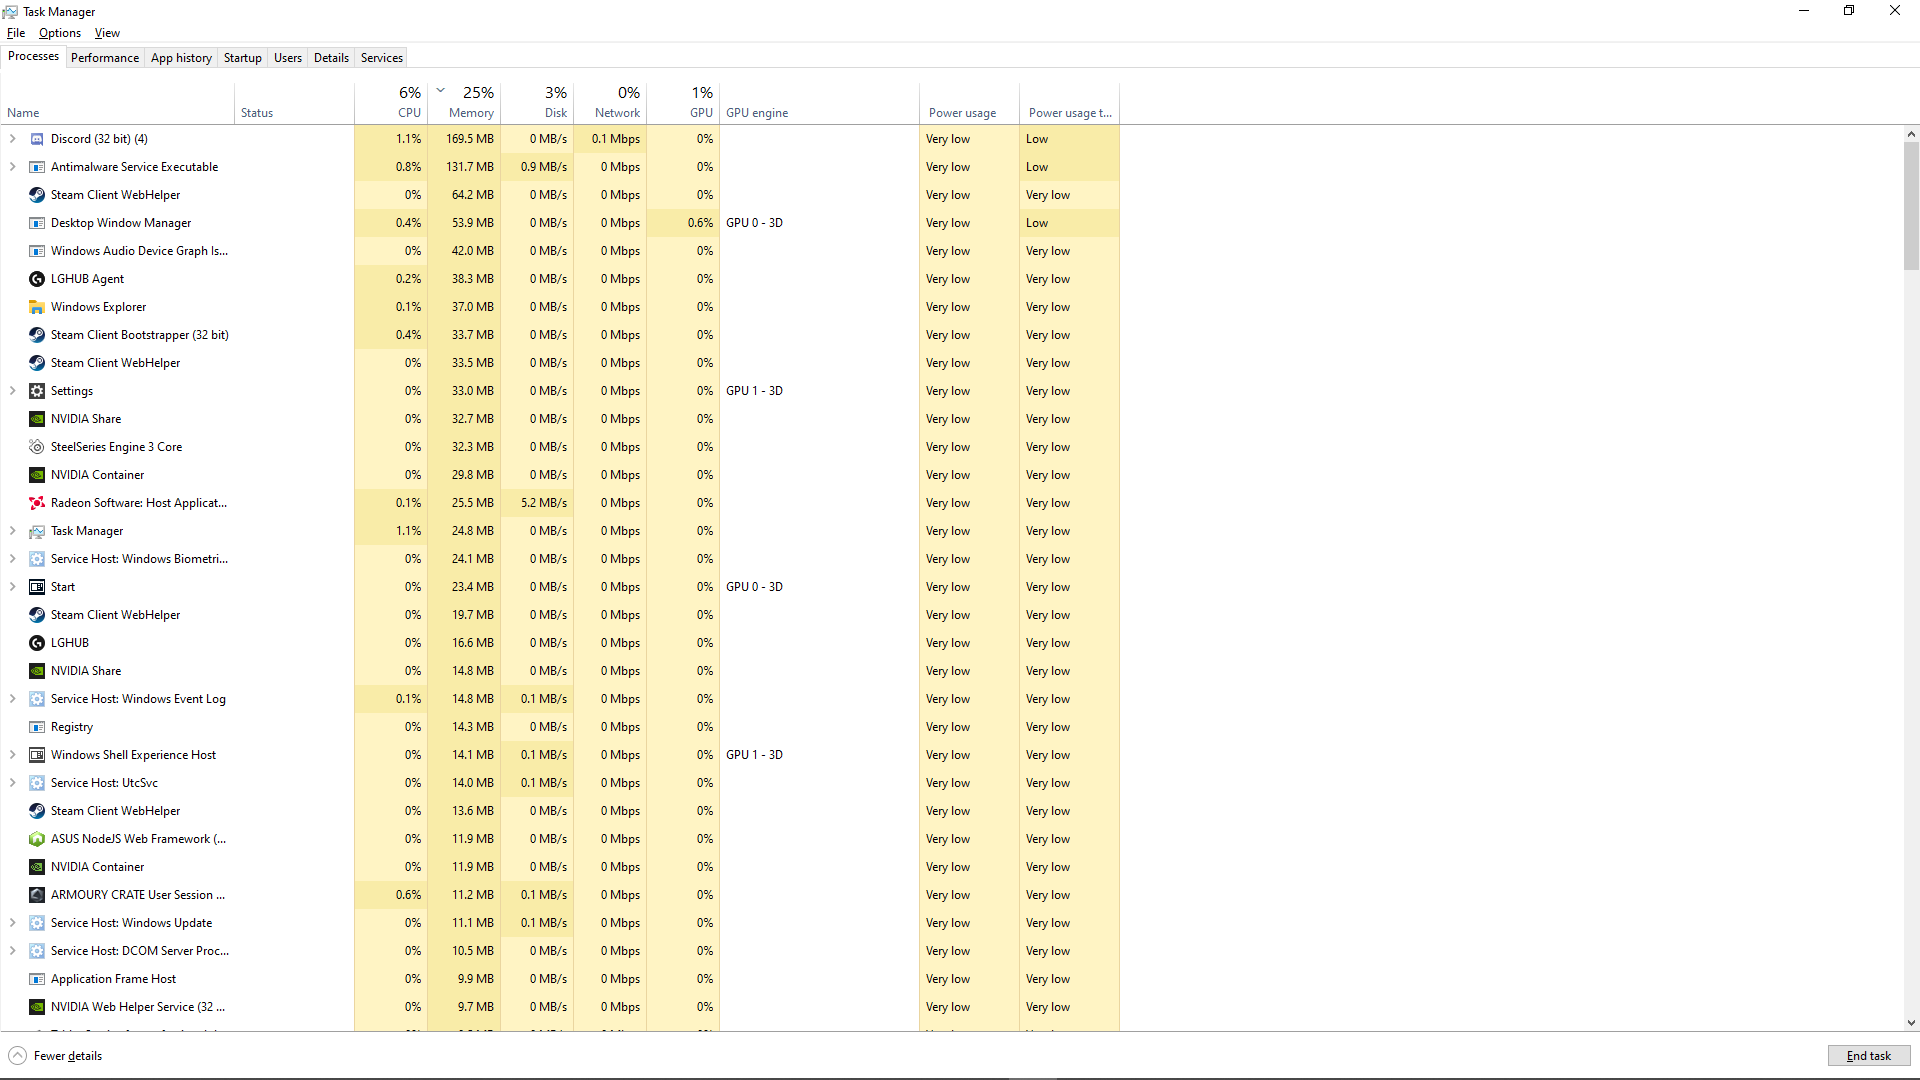 Is it normal for windows 10 to spend around 4.5Gb of memories on desktop? 7501e5a5-683f-443f-8883-633ad0e8831b?upload=true.png